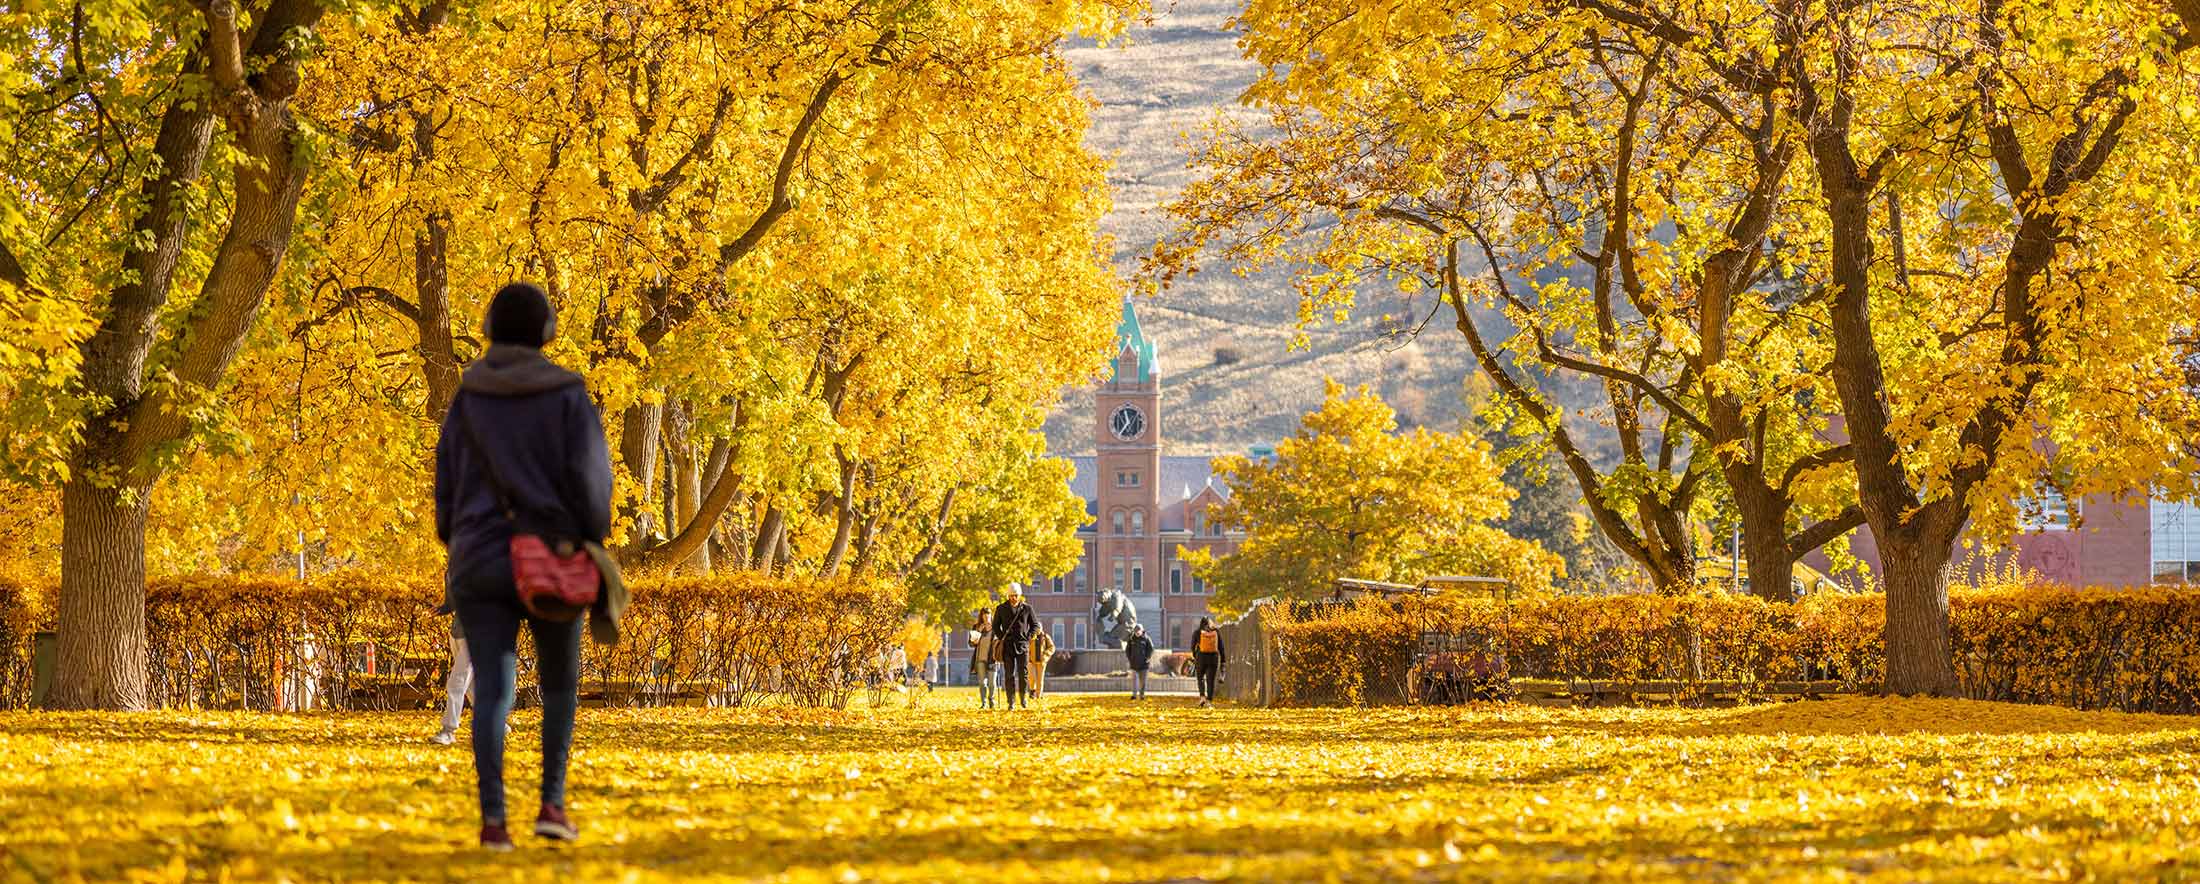 10 Things We Love About Missoula in the Fall